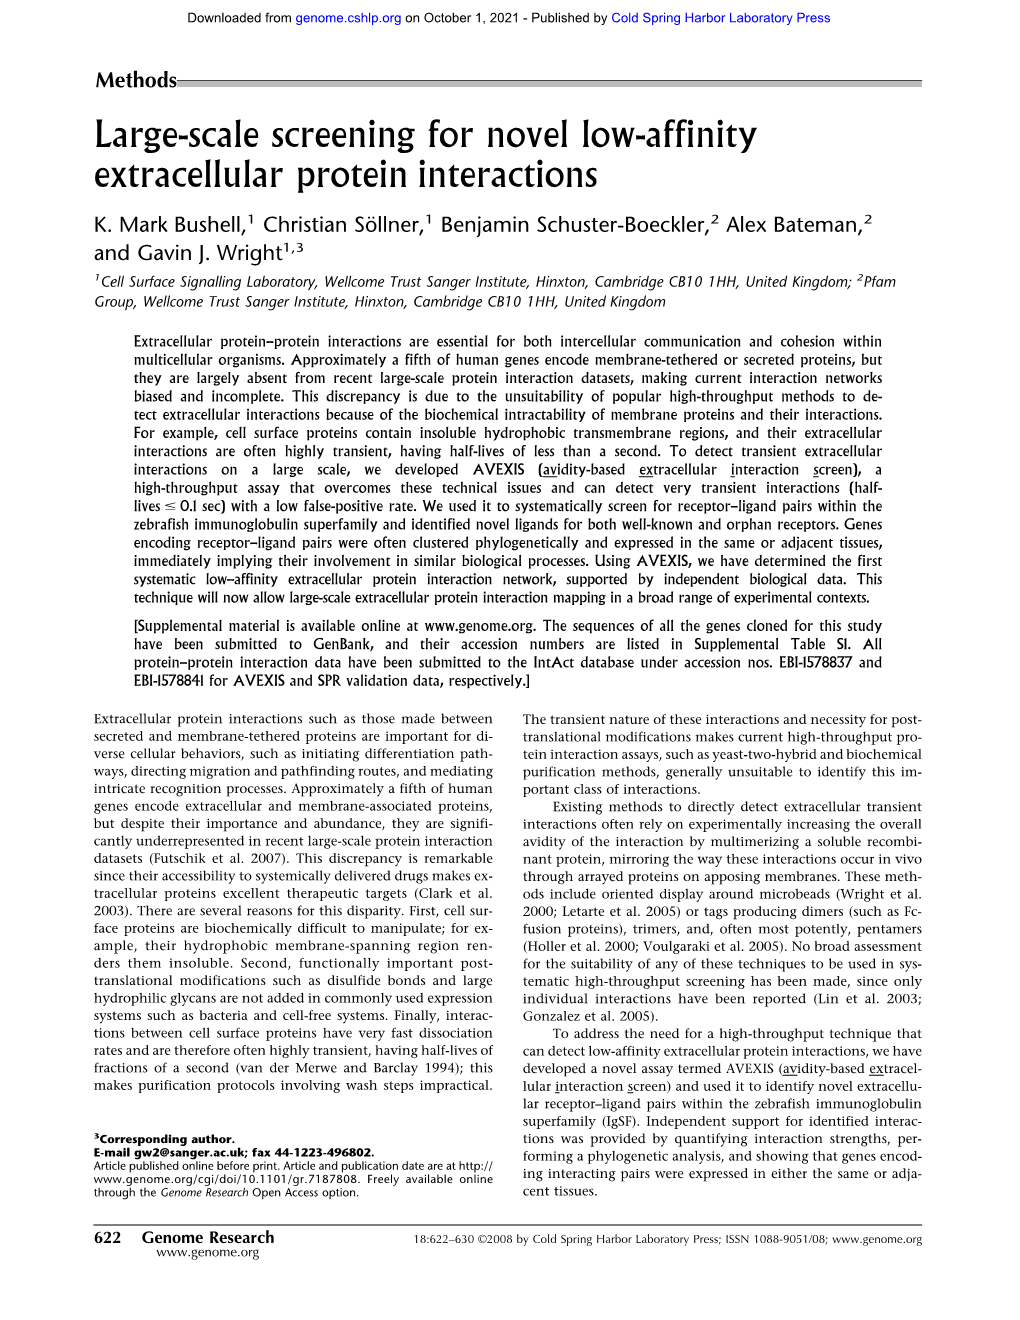 Large-Scale Screening for Novel Low-Affinity Extracellular Protein Interactions